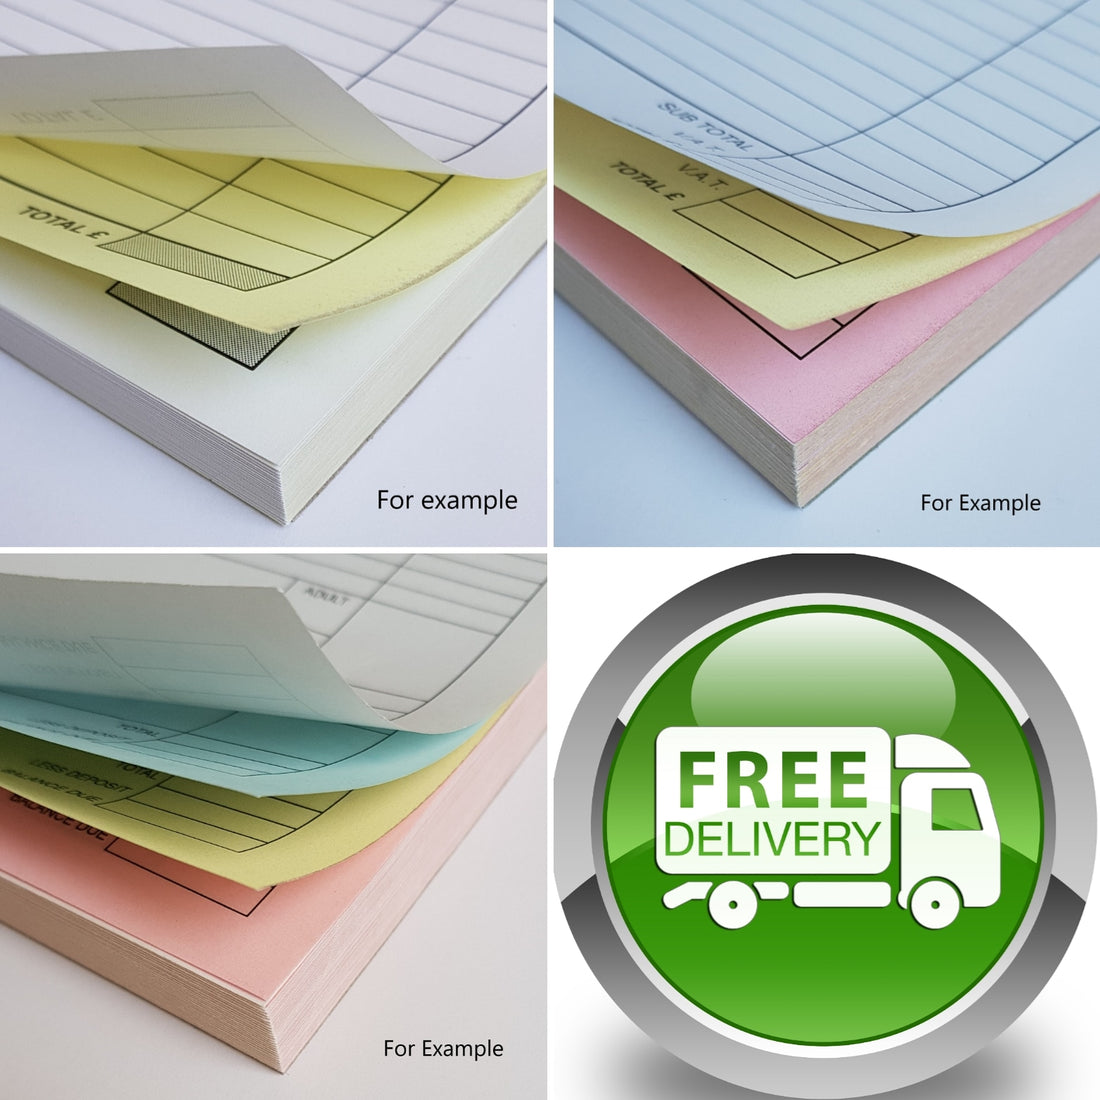 NCR Custom Paper Printing Specialists - How Can We Help Your Business?